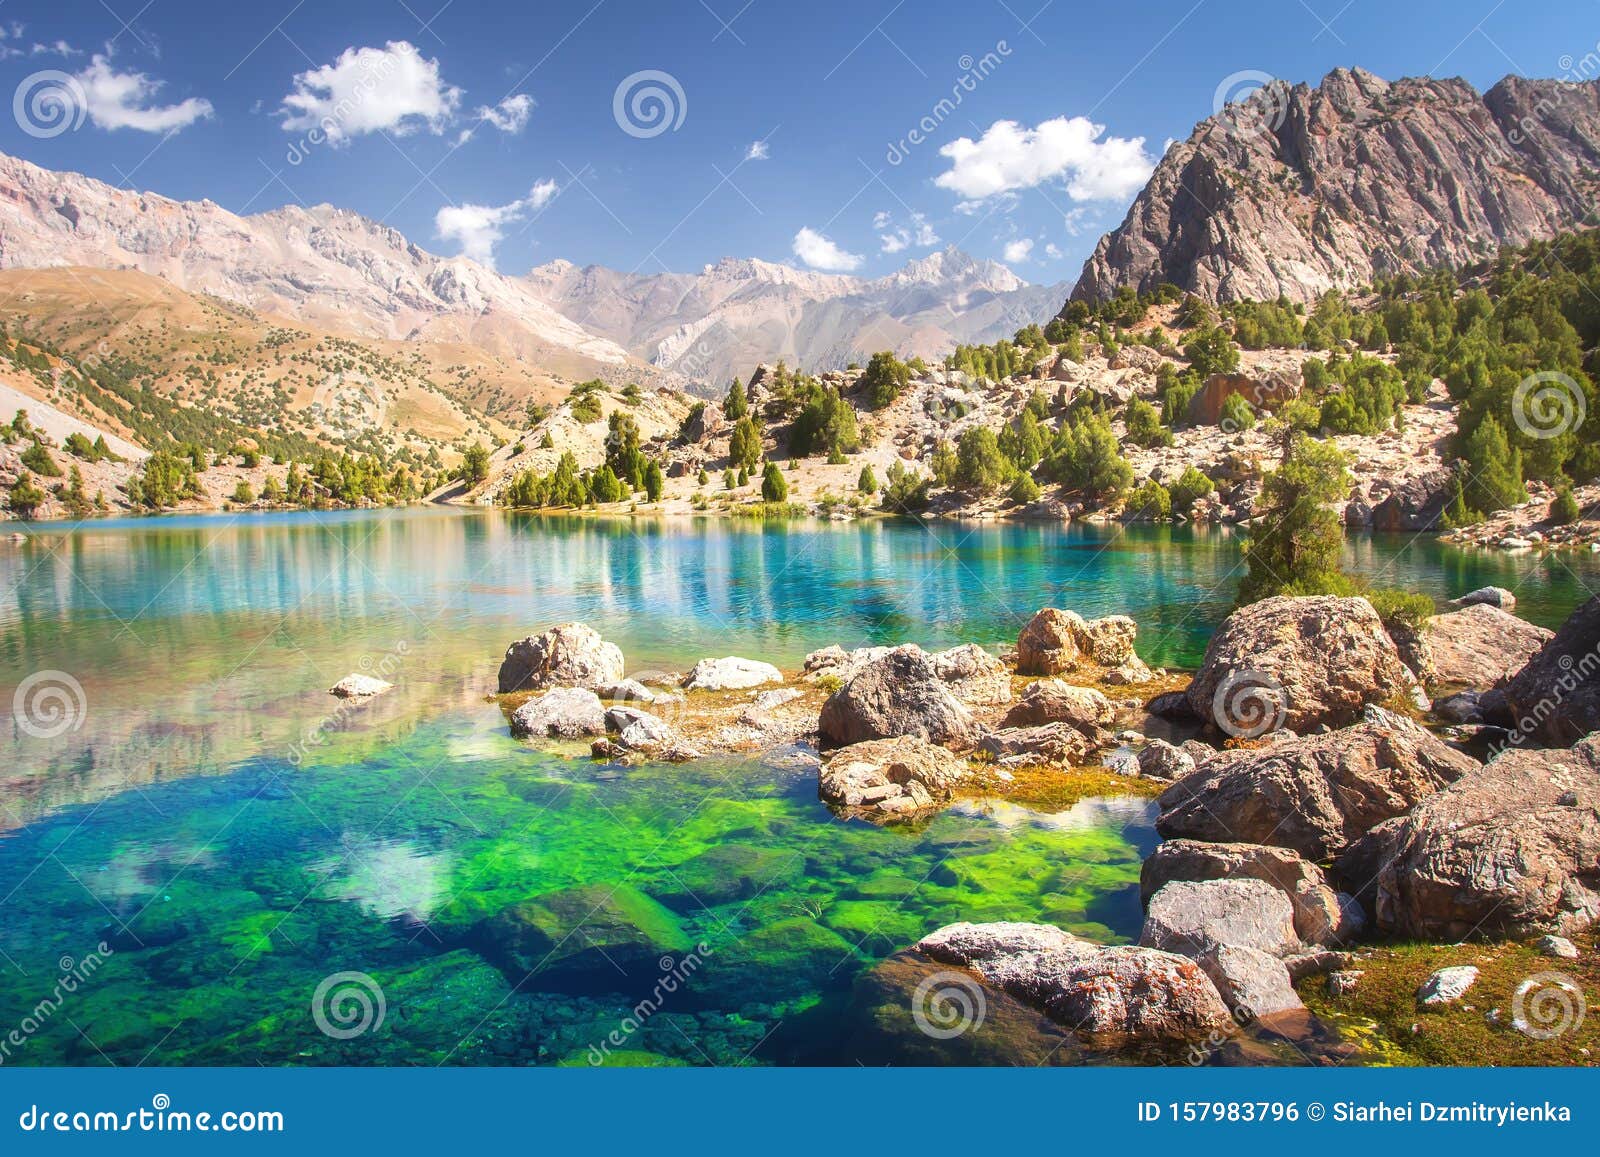 Alaudin Lake in Fann Mountains, Tajikistan. Fan Mountains with Turquoise in Lakes on Clear Day Stock Photo - of allaudinskie: